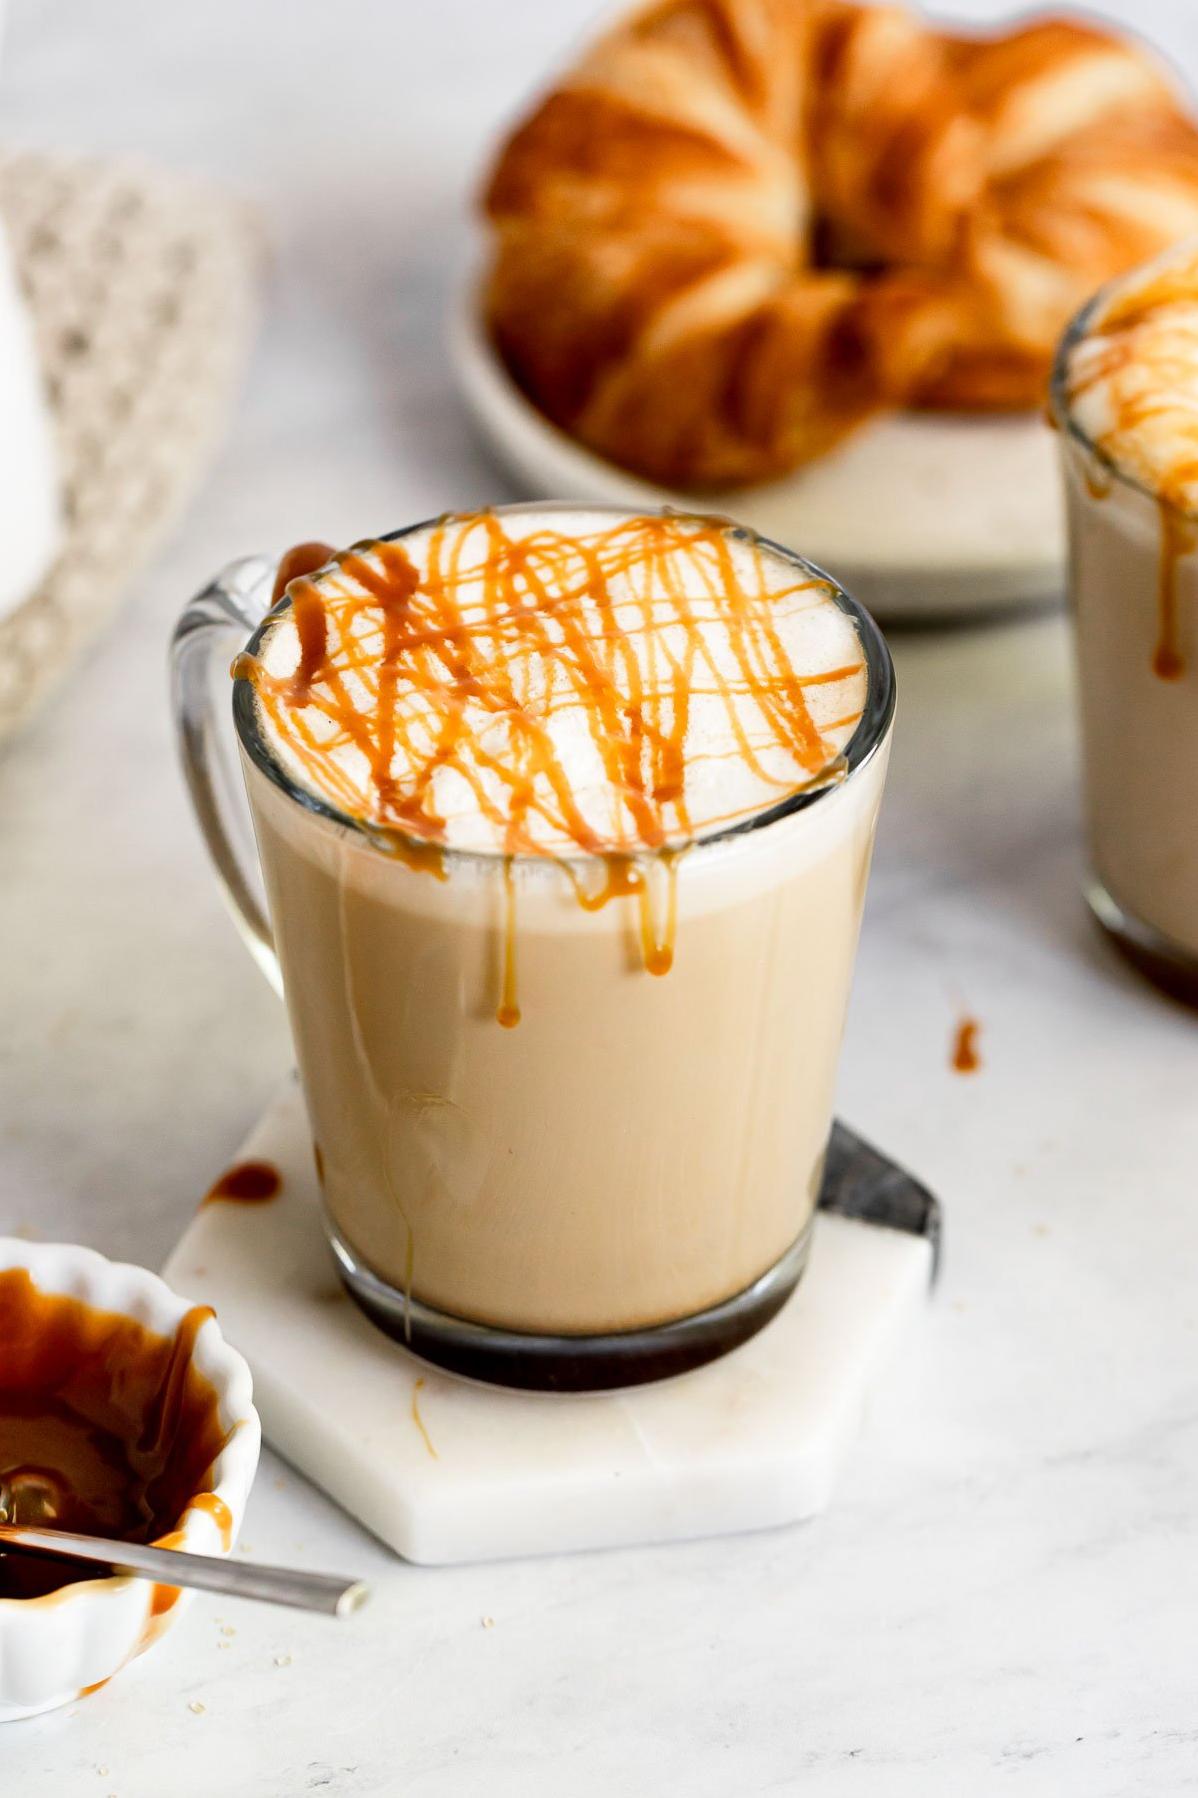  A perfect brew to share with friends or to warm up on chilly mornings, this Carnation Caramel Latte is a must-try.